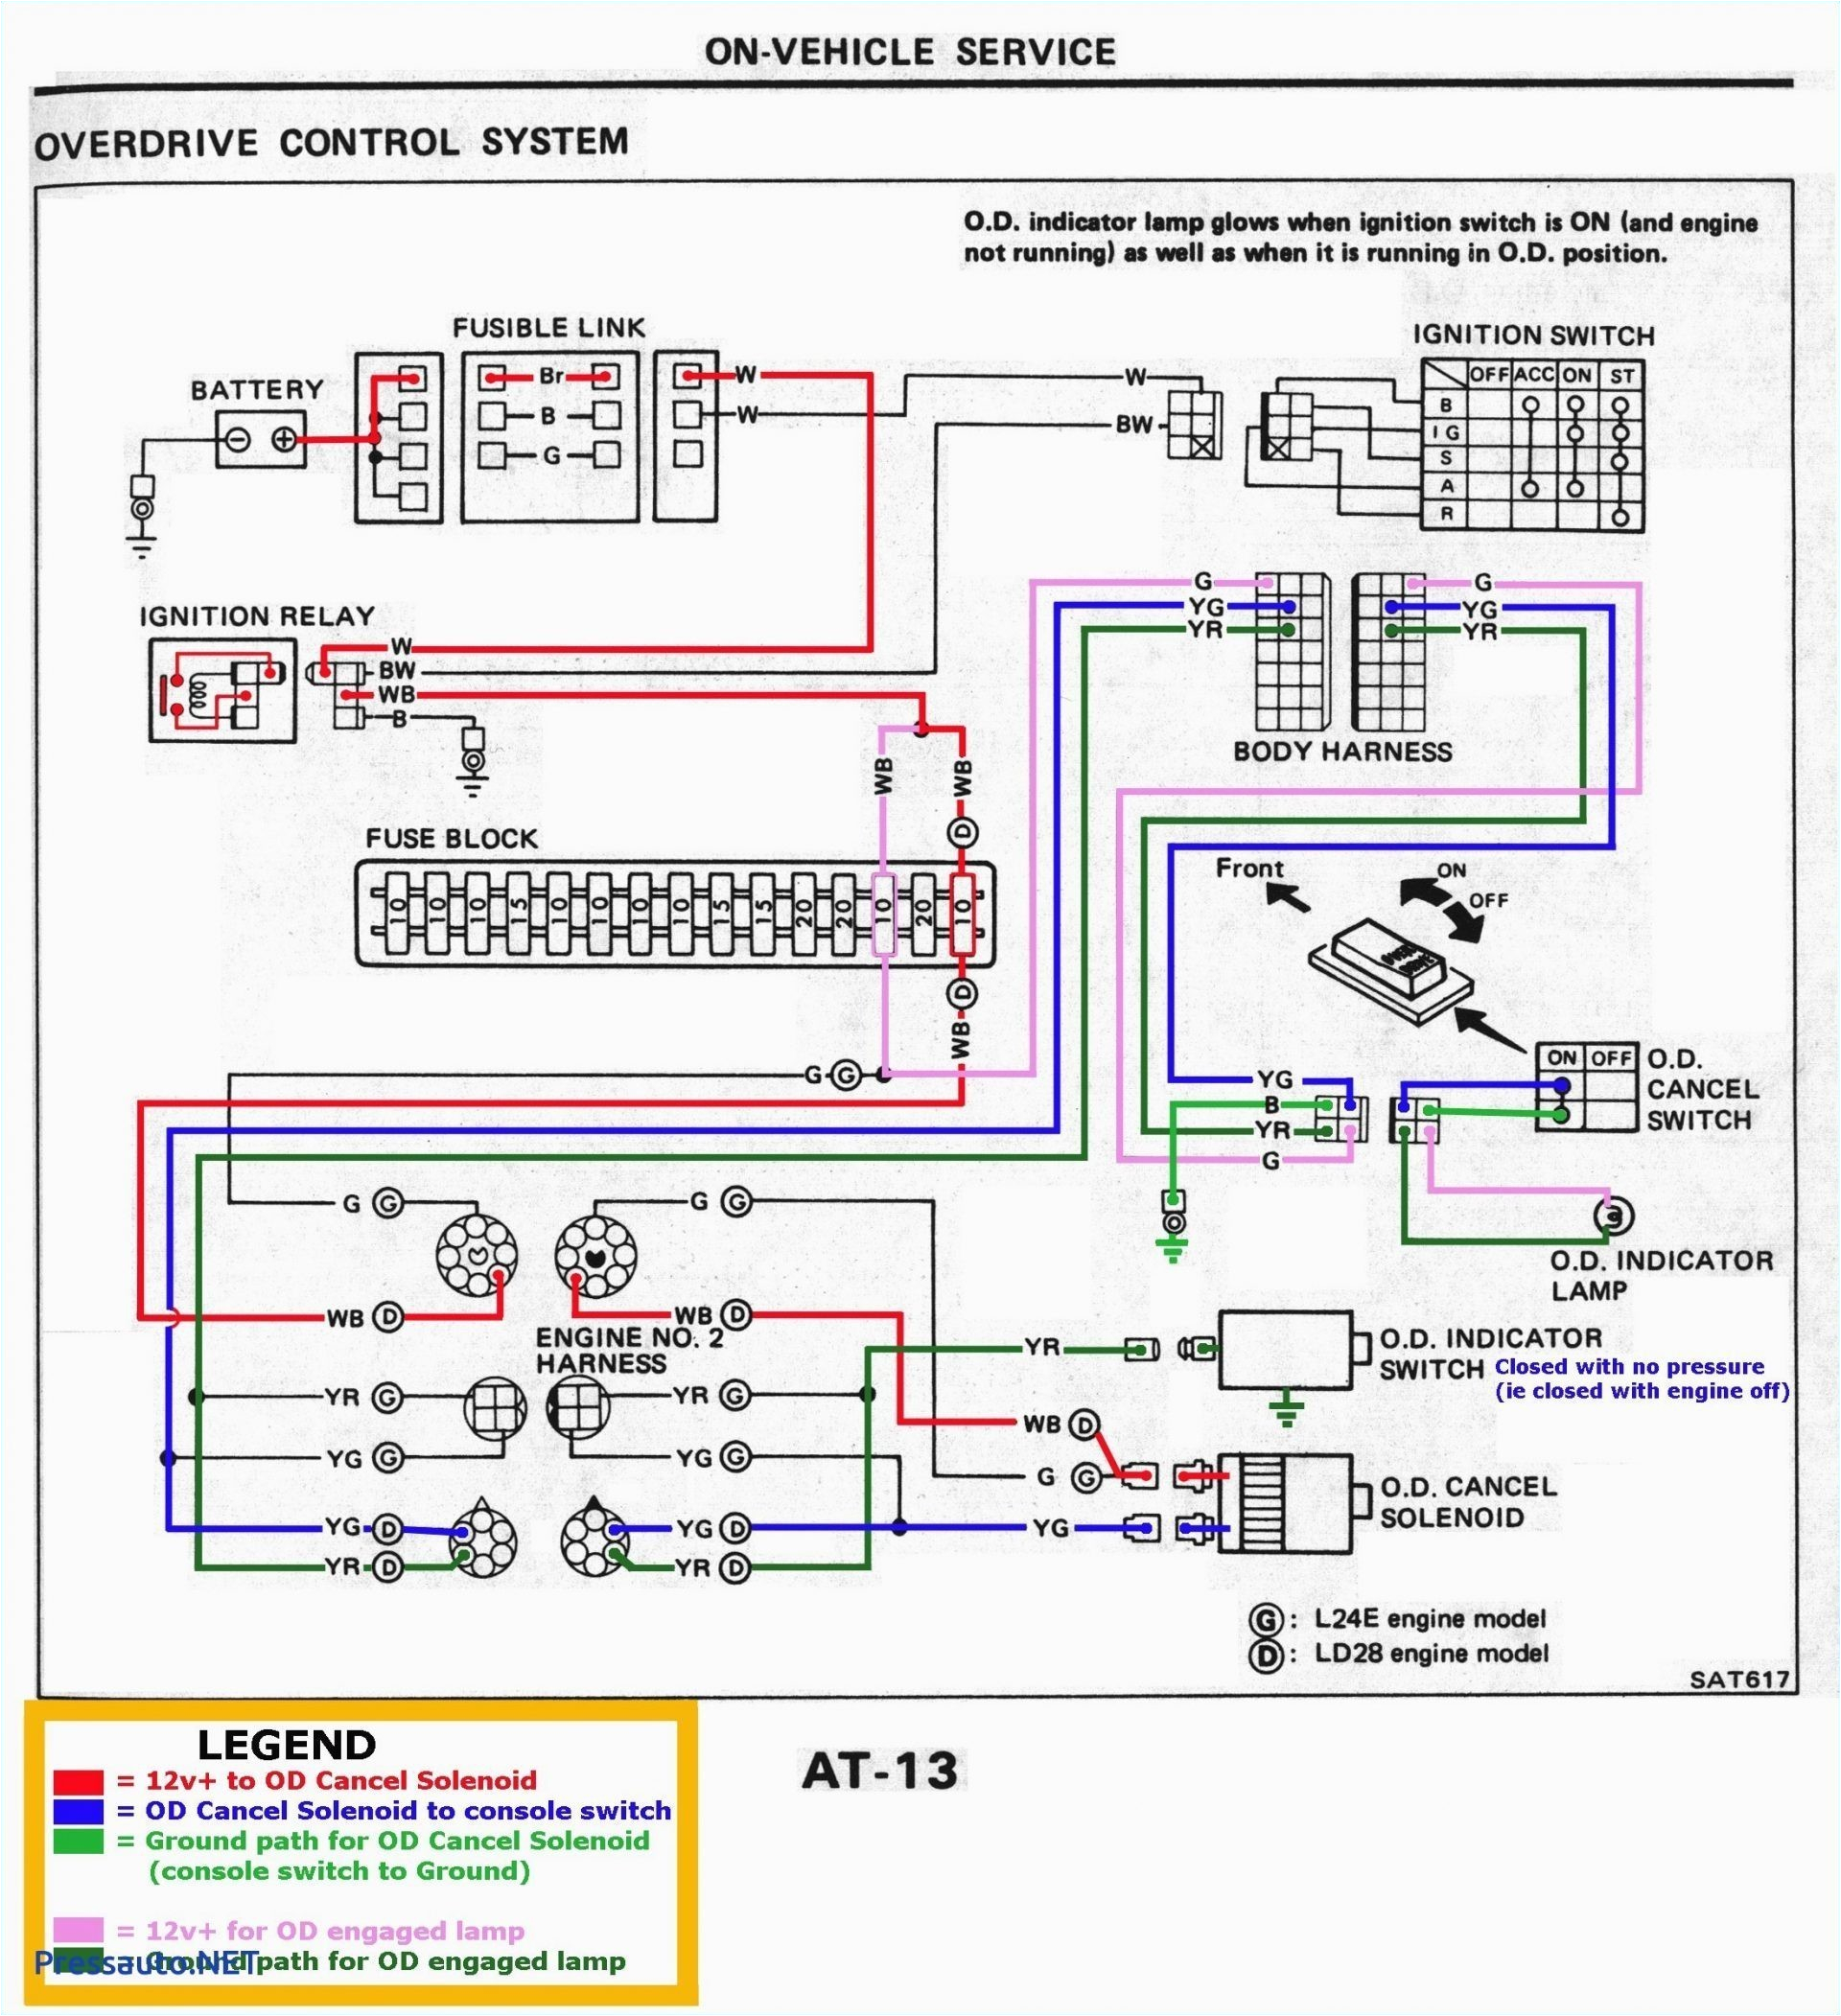 wiring harness questions wiring diagram page wiring harness design engineer interview questions wiring harness design interview questions